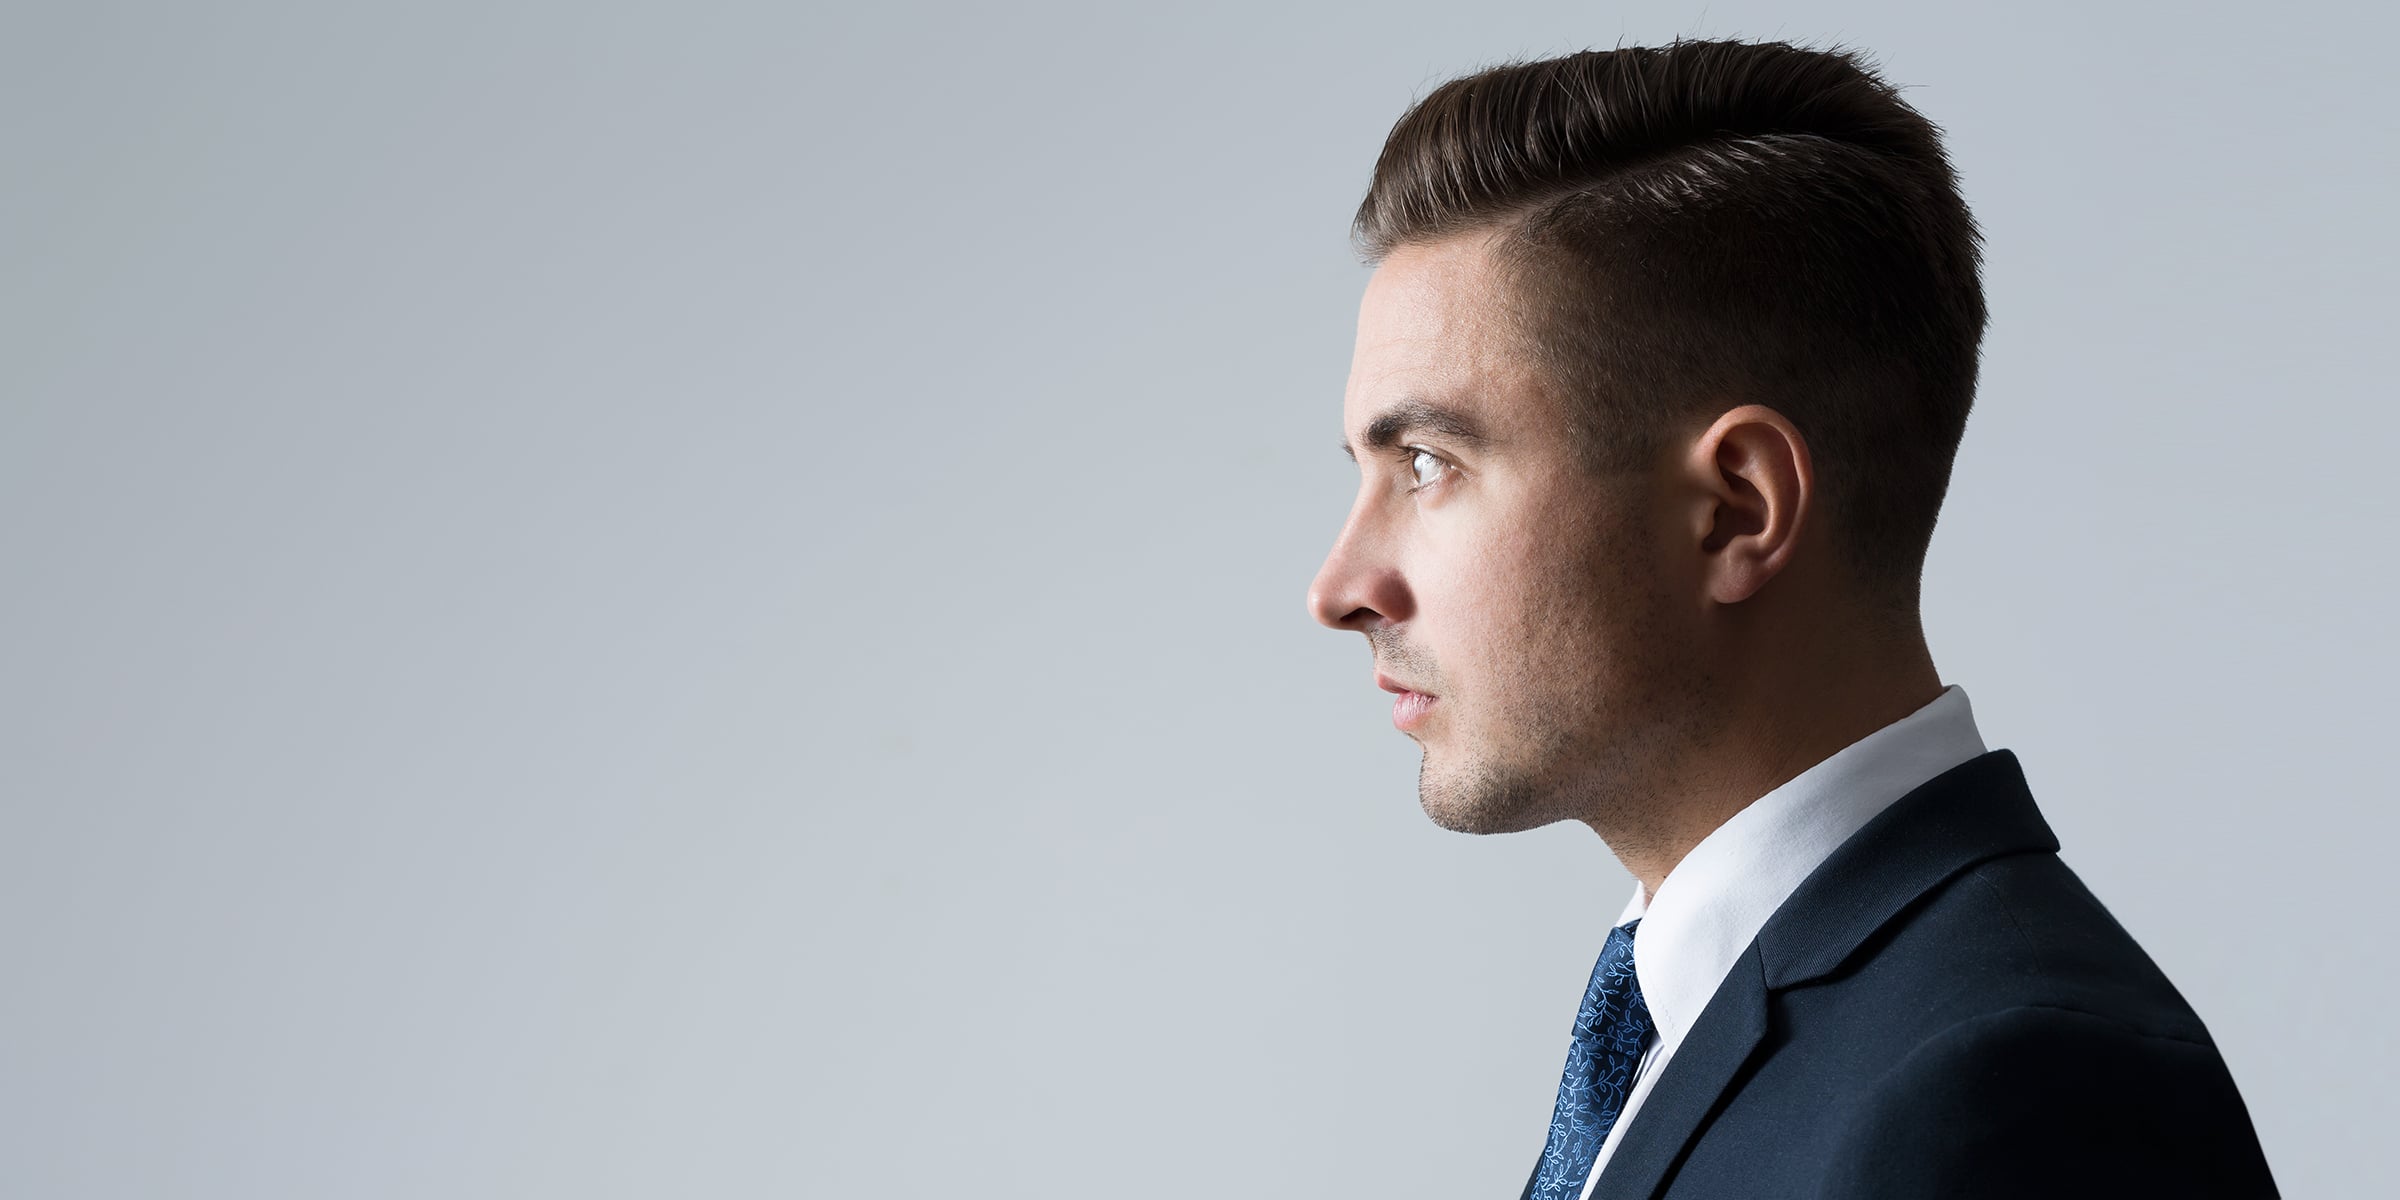 Profile of man wearing a blue blazer with hair slicked back.